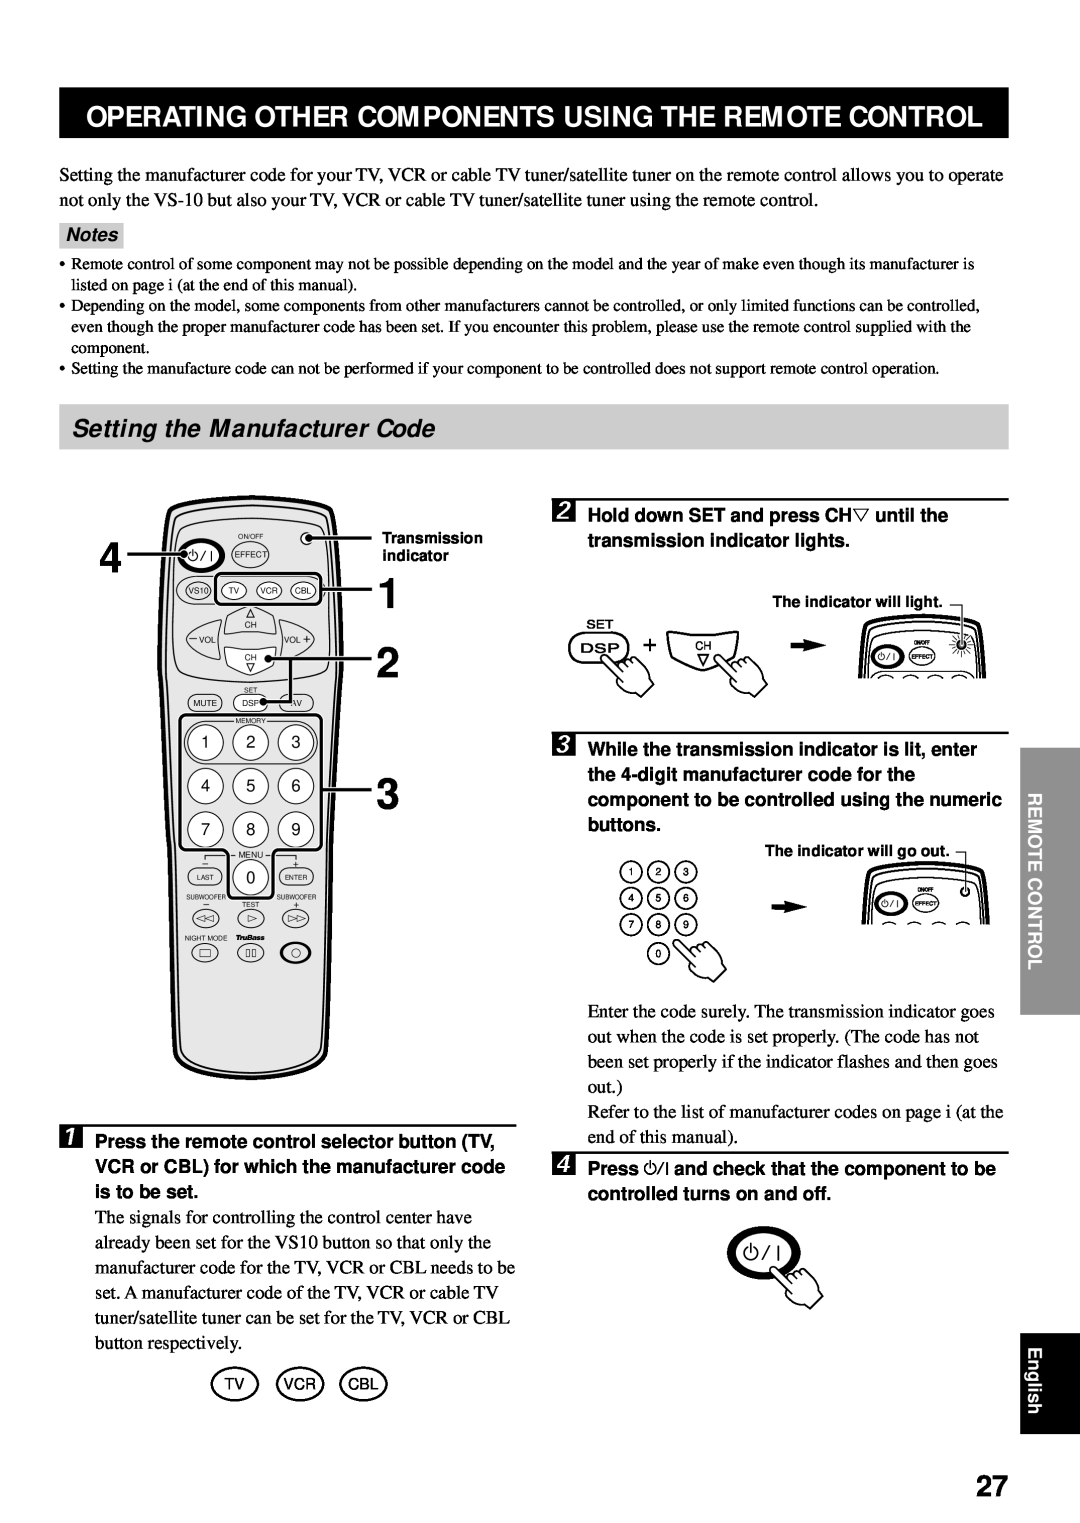 Yamaha VS-10 owner manual Setting the Manufacturer Code, Press the remote control selector button TV, buttons, English 